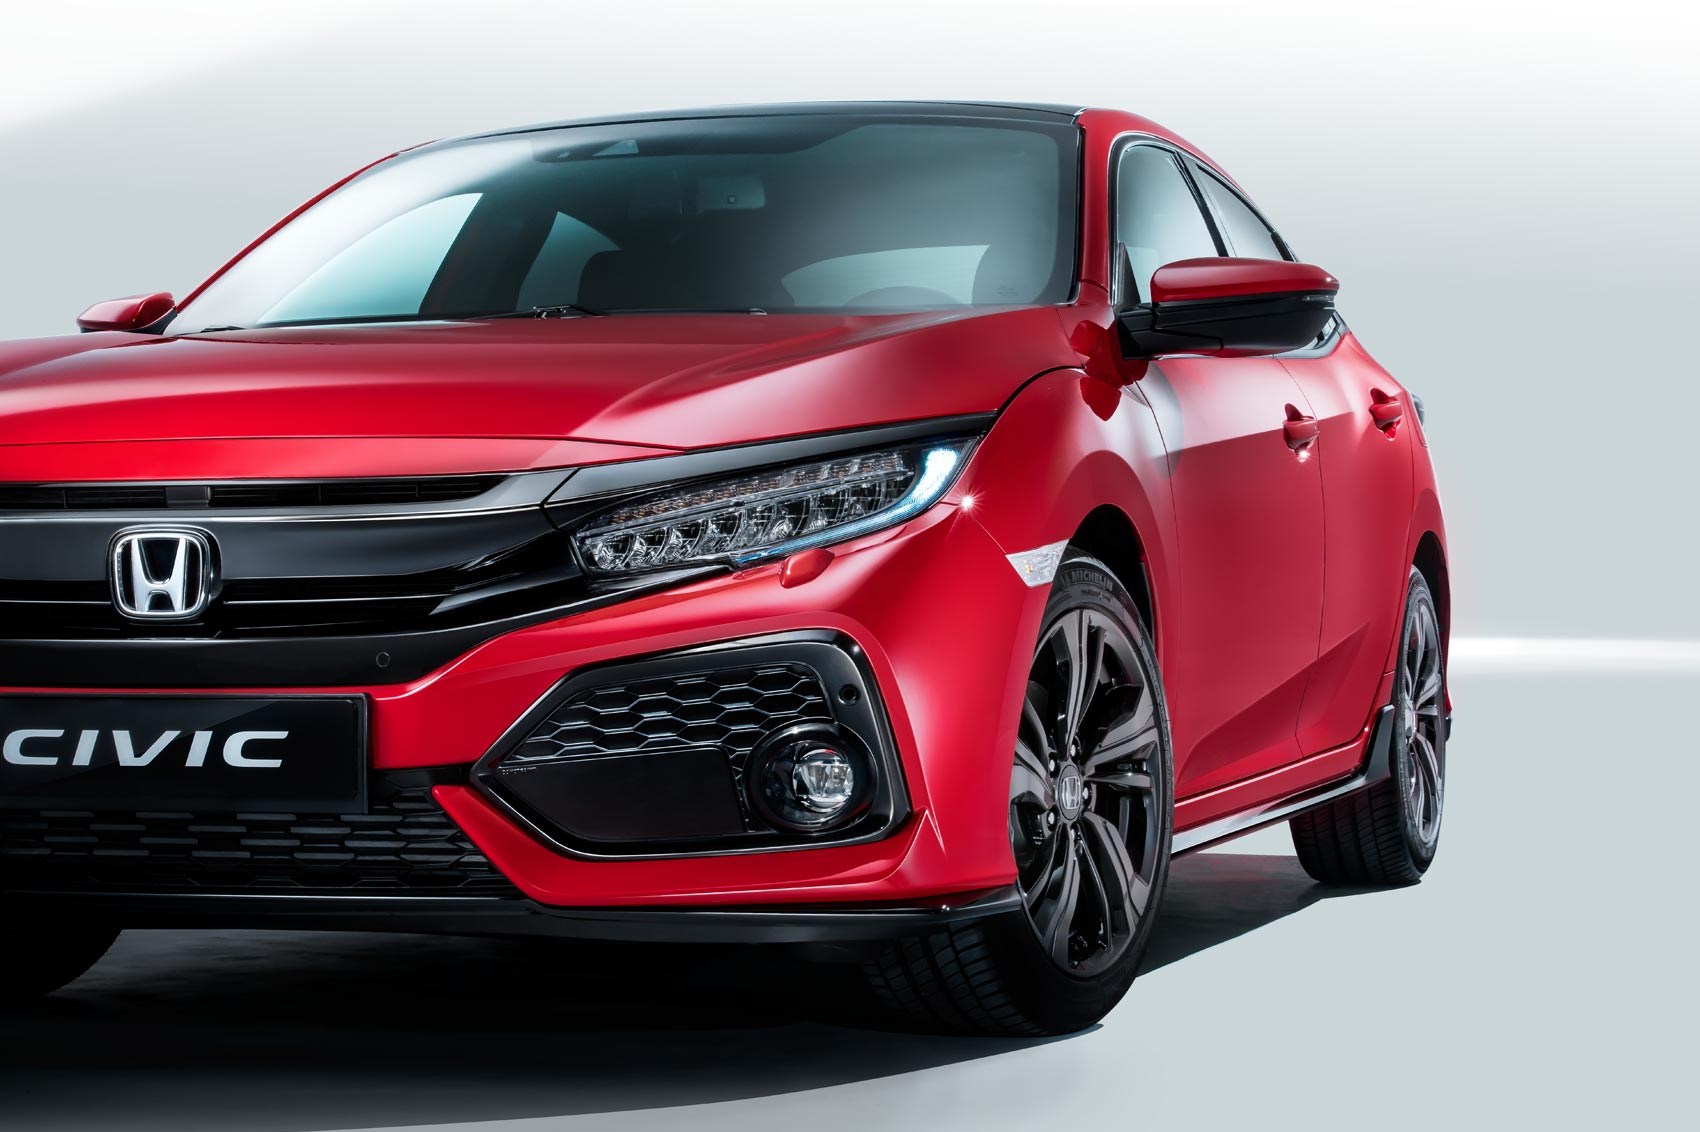 New 2017 Honda Civic Hatchback Officially Unveiled Car